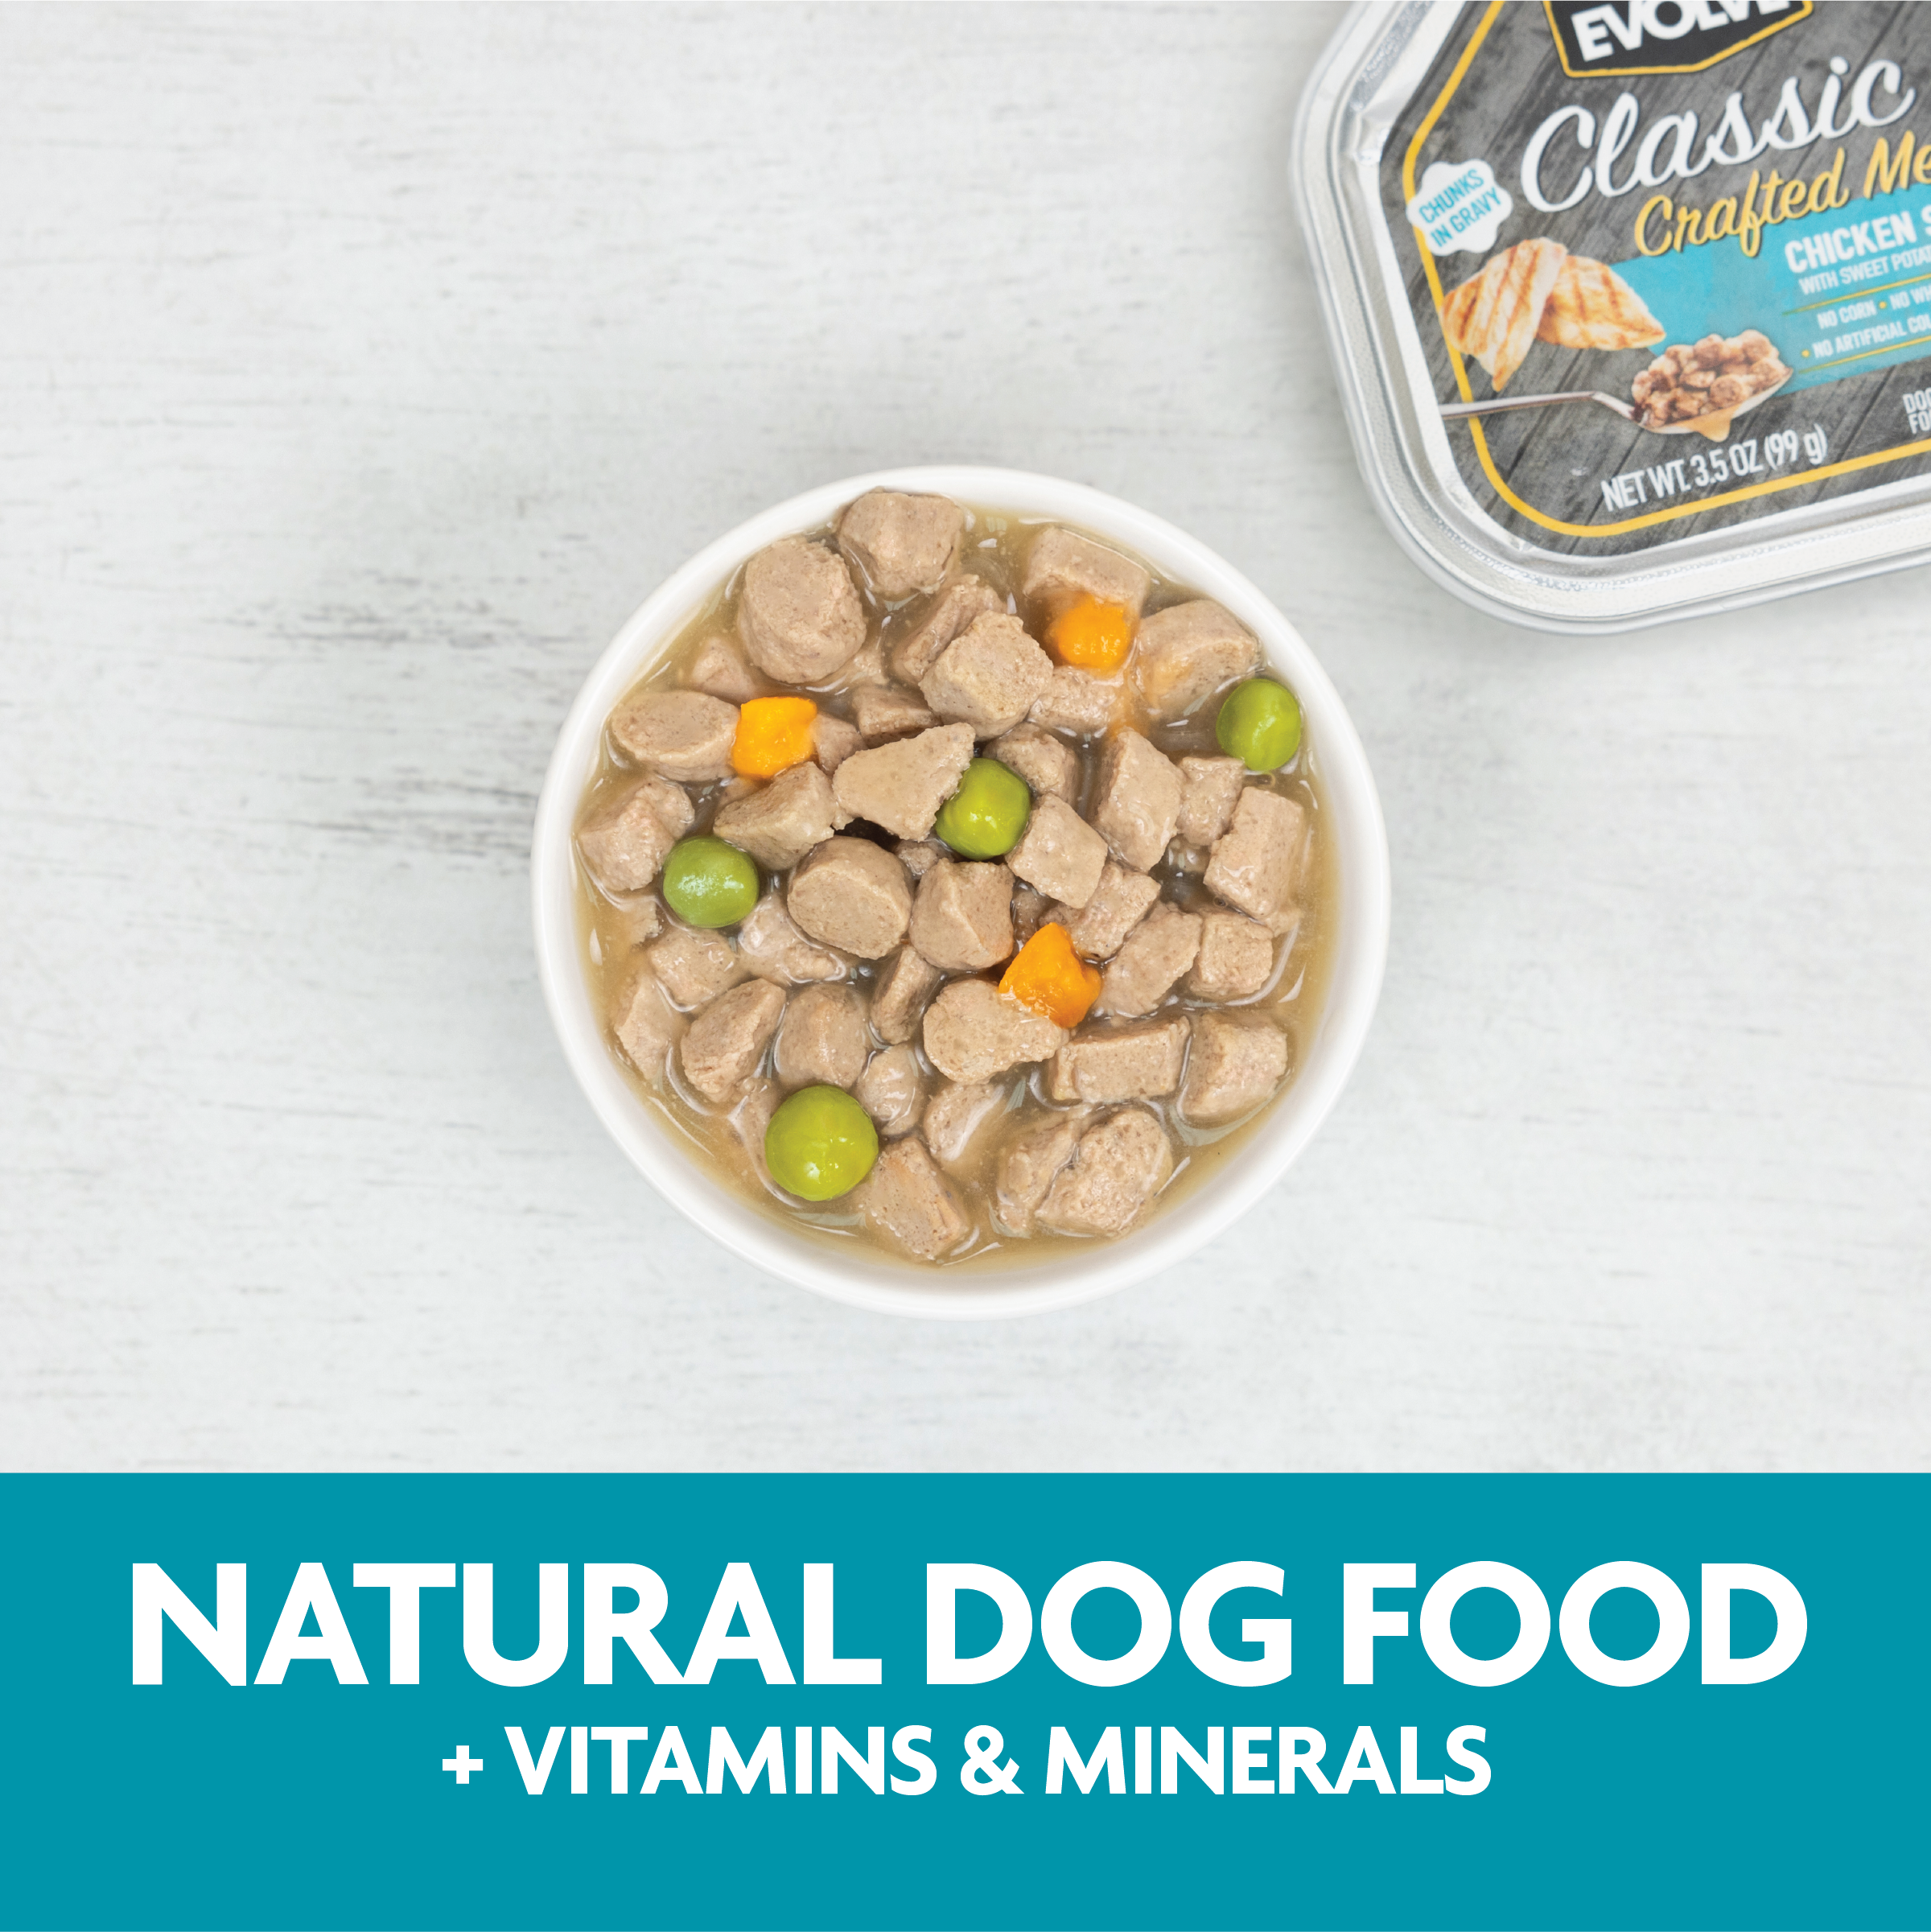 Evolve_Dog_Classic_CraftedMeals_ChickenStew_Layout-09.png